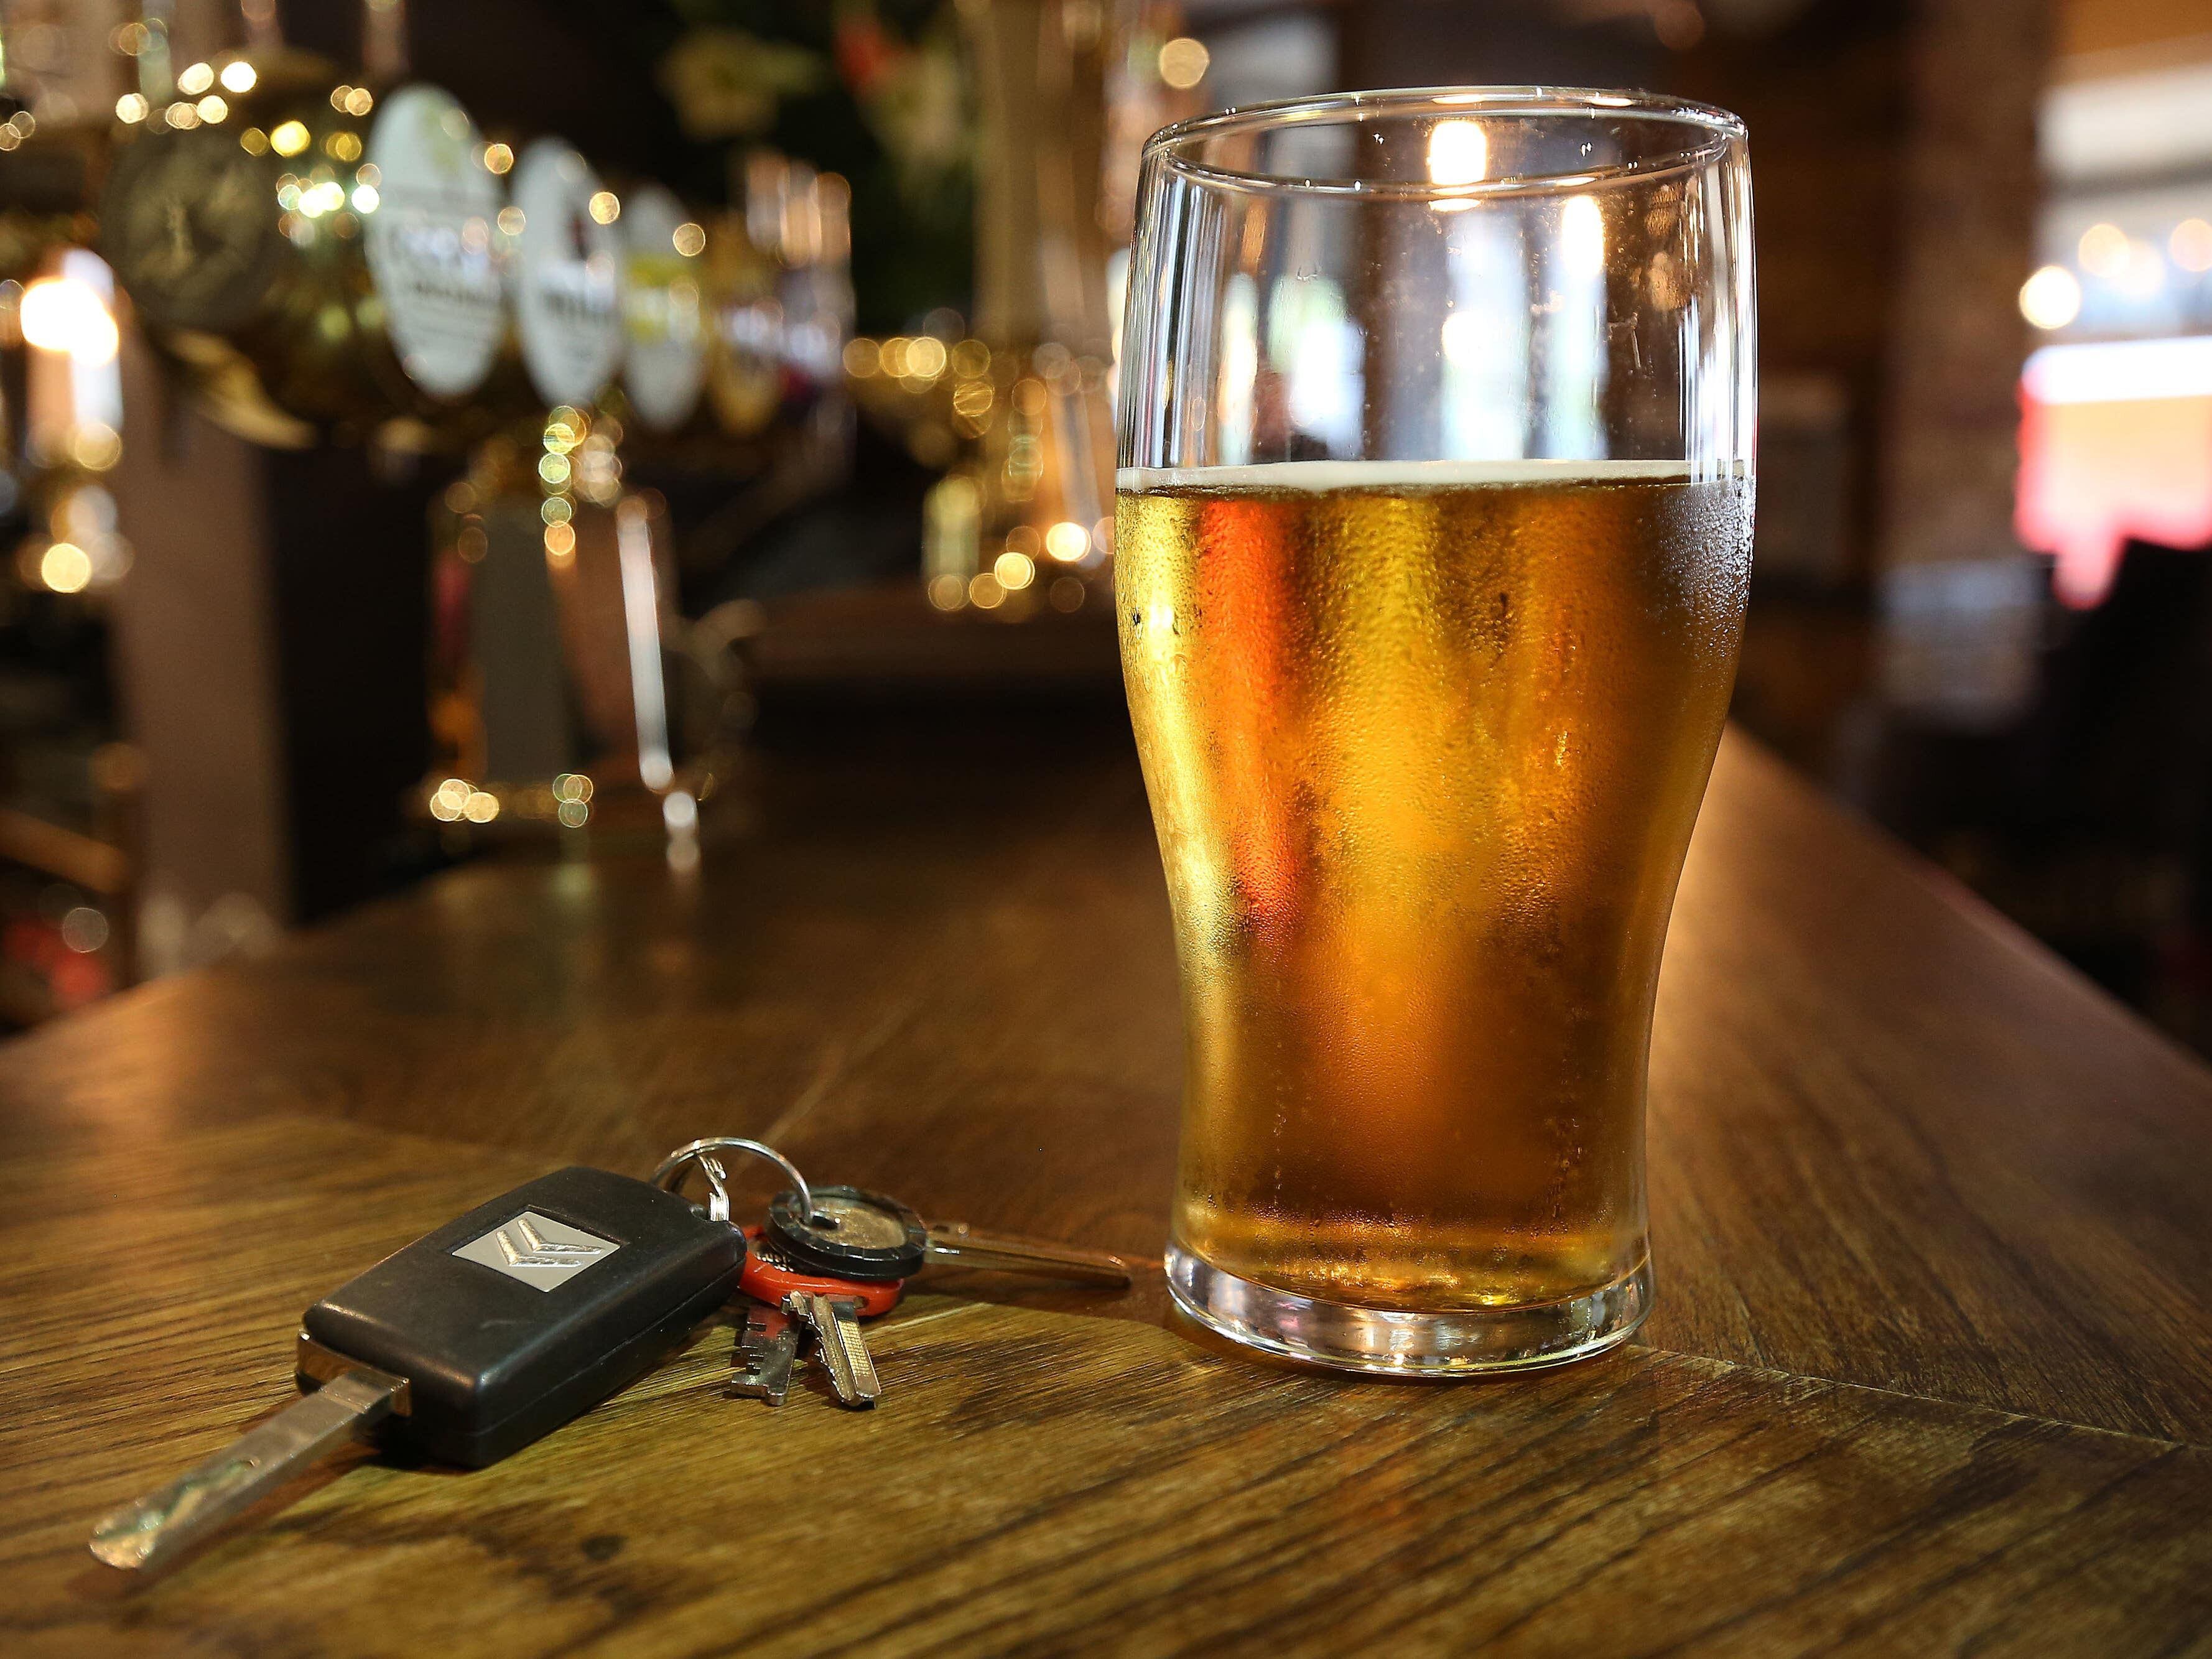 One-in-20 admit to drink driving – survey